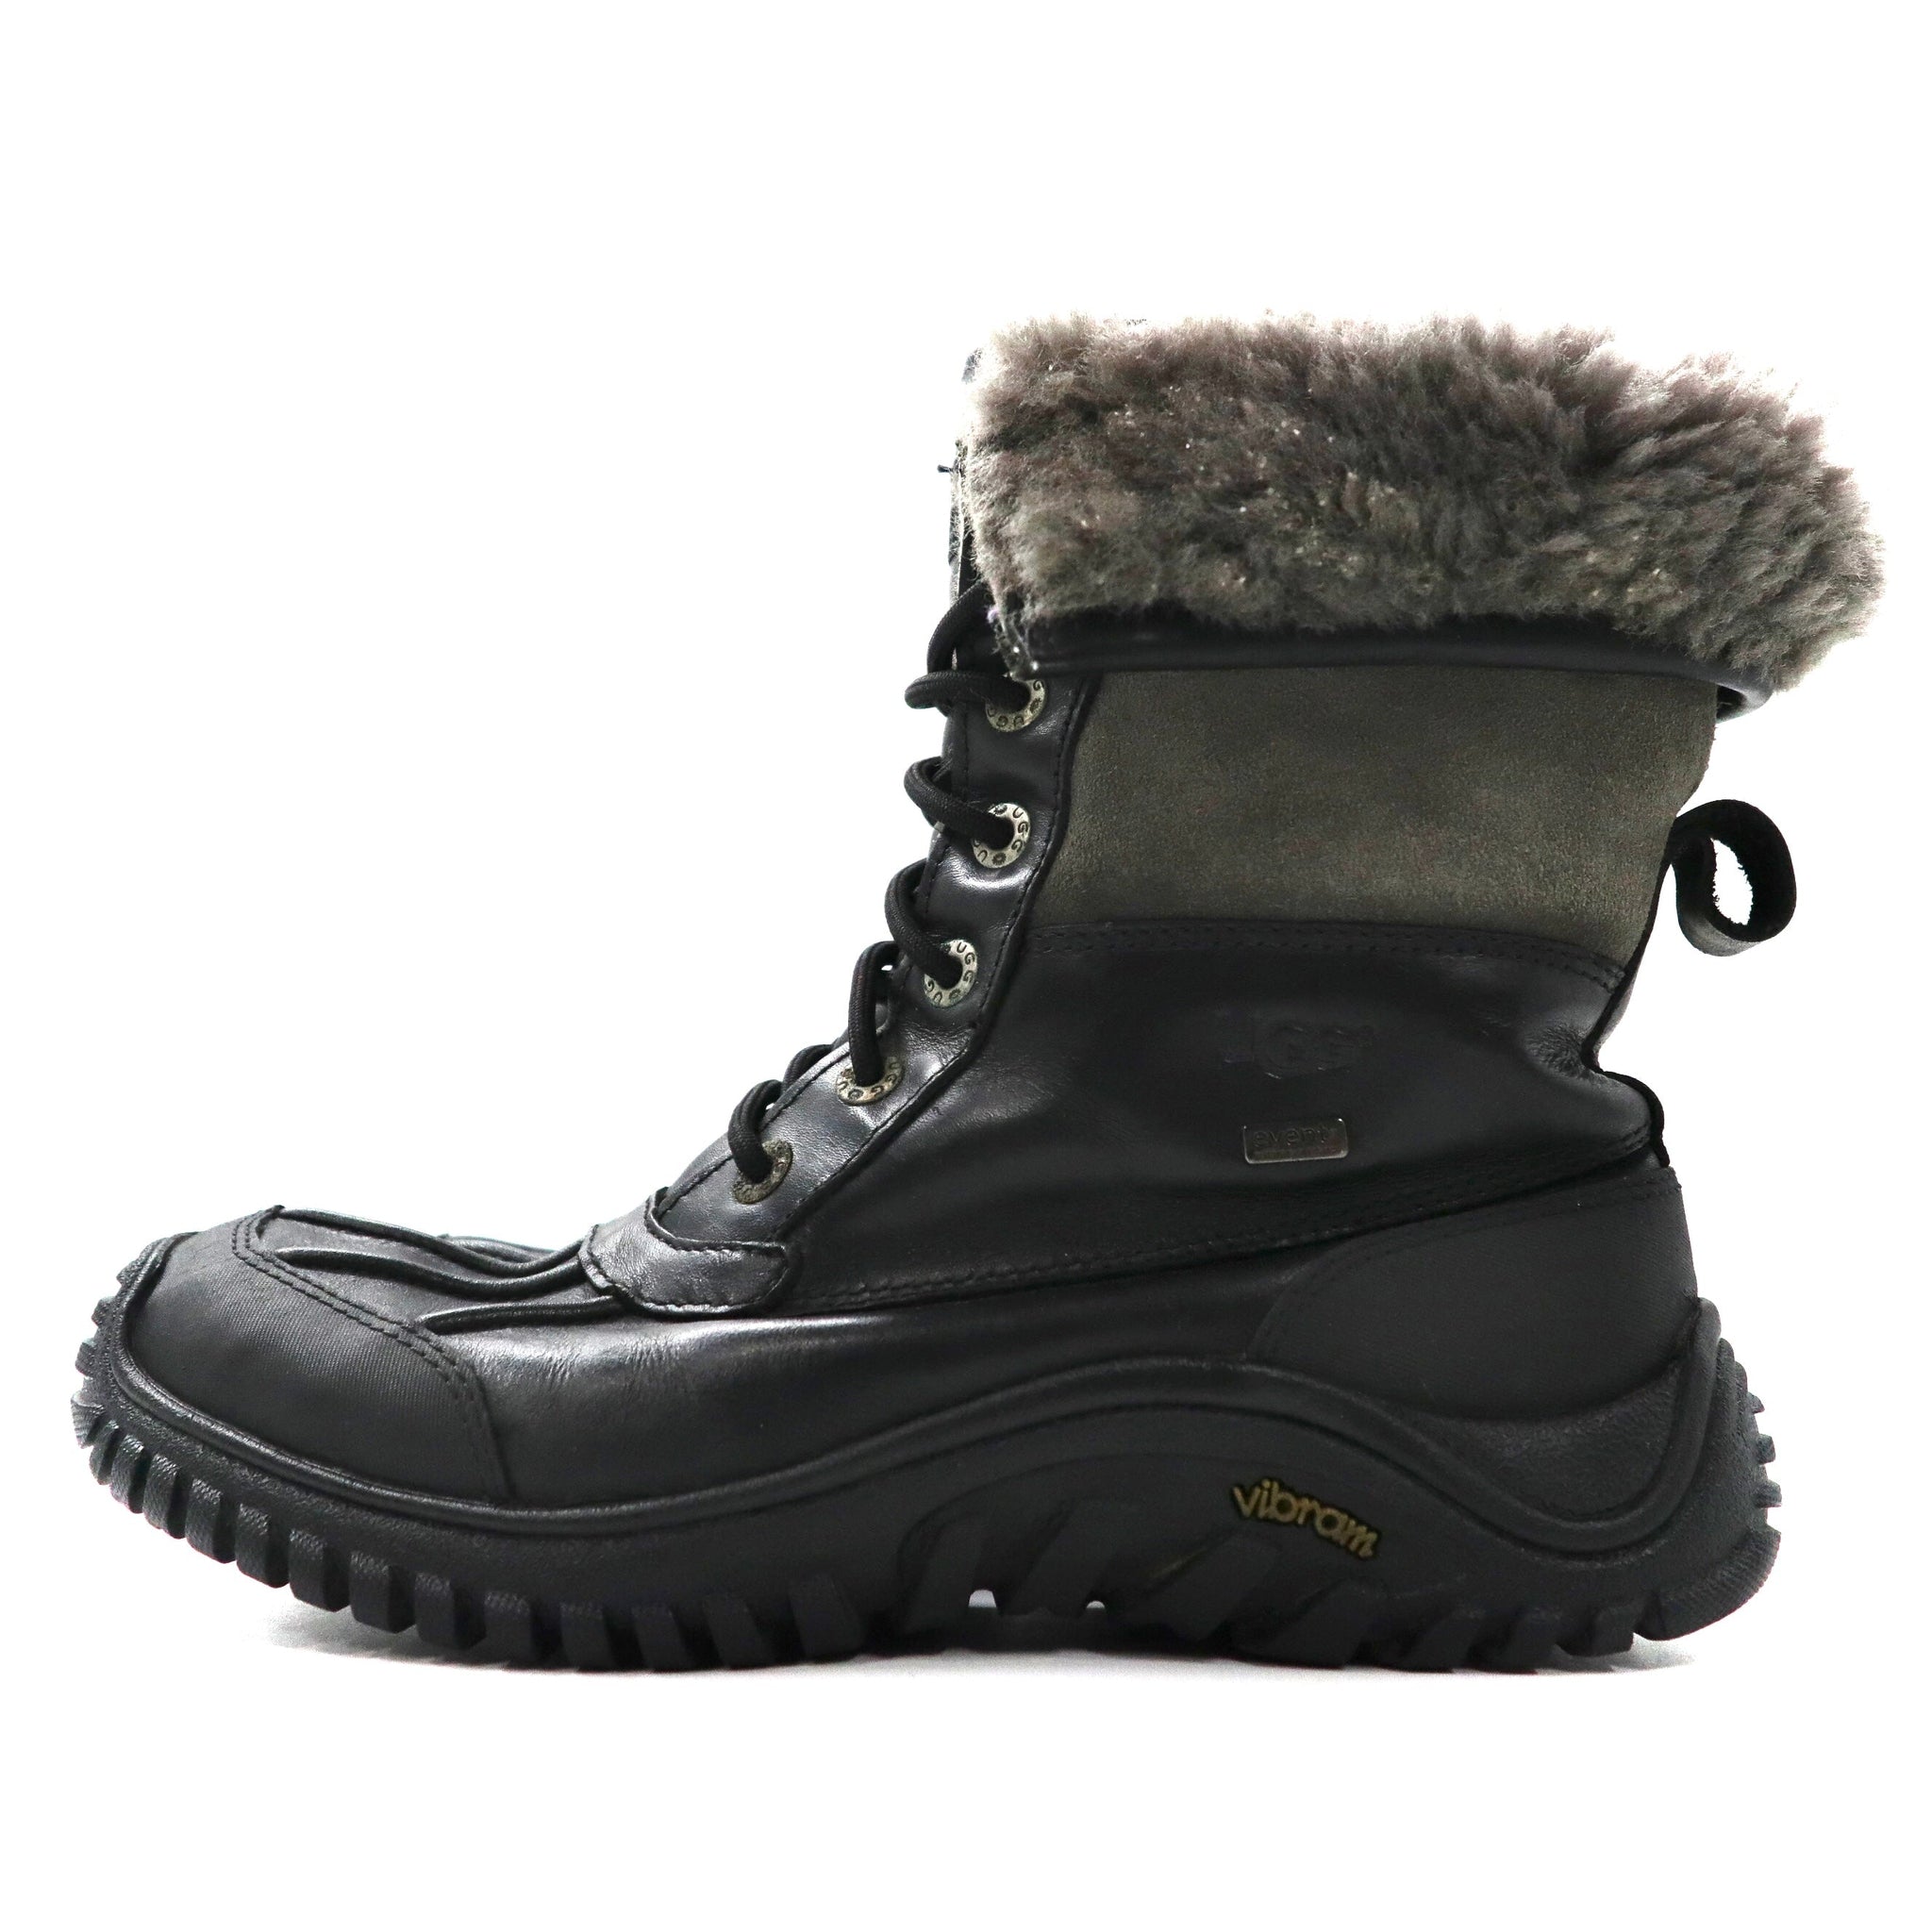 UGG Adiron Duck Boots Snow Boots US6.5 Black Leather